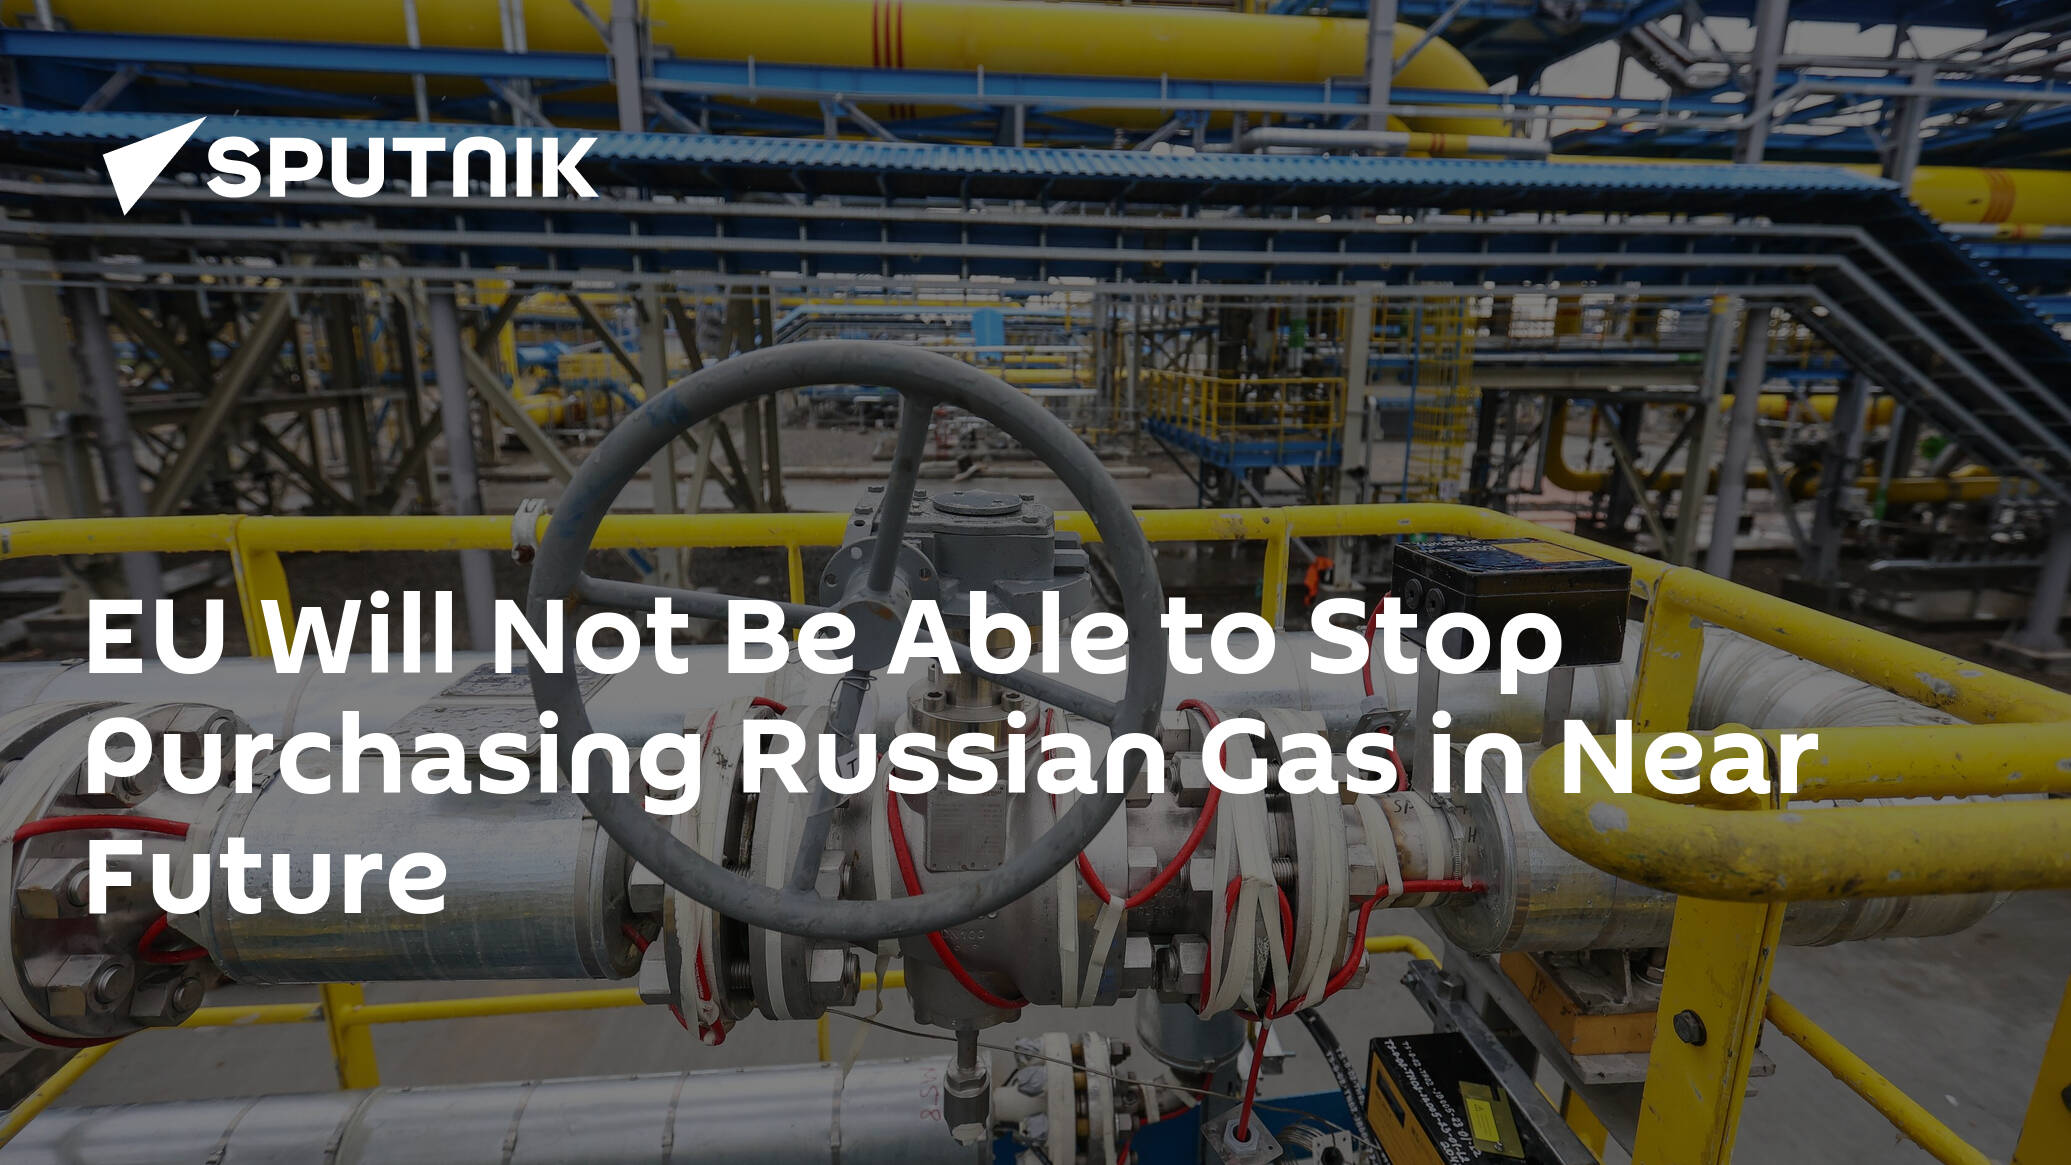 EU Will Not Be Able to Stop Purchasing Russian Gas in Near Future